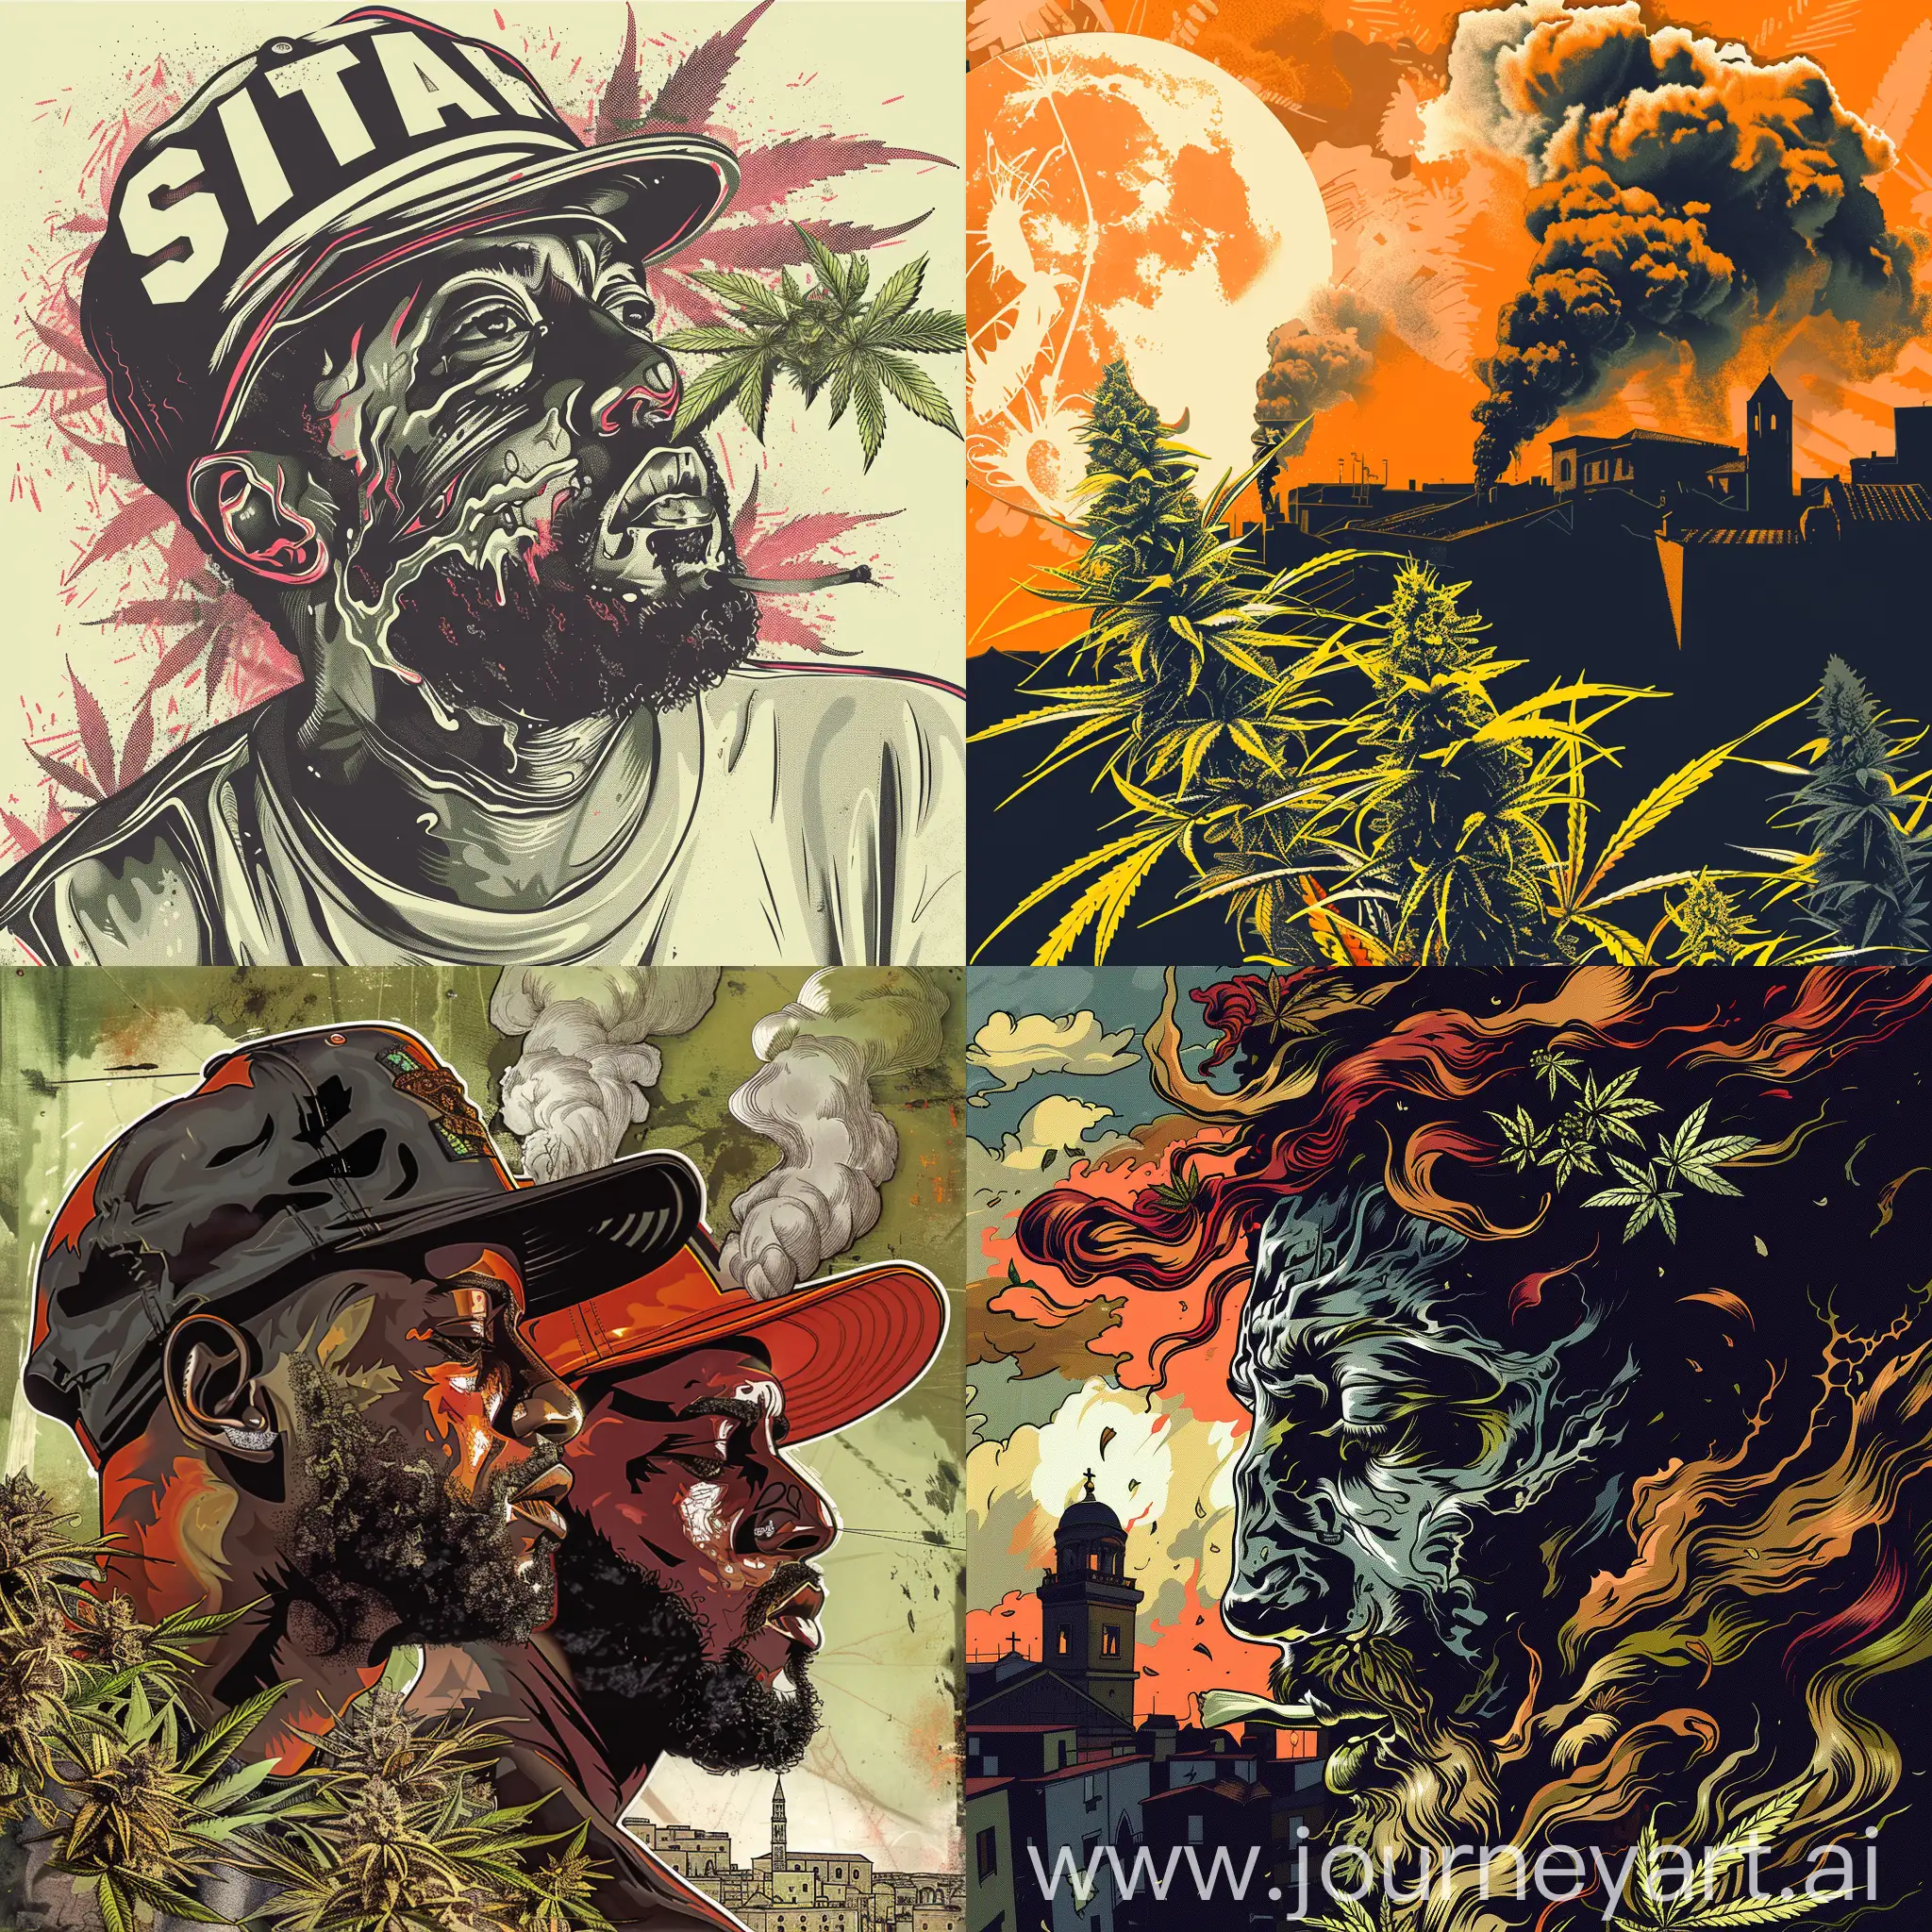 Make me a graphic for a music CD for rappers who are in Sicily and make rap music related to smoking marijuana.